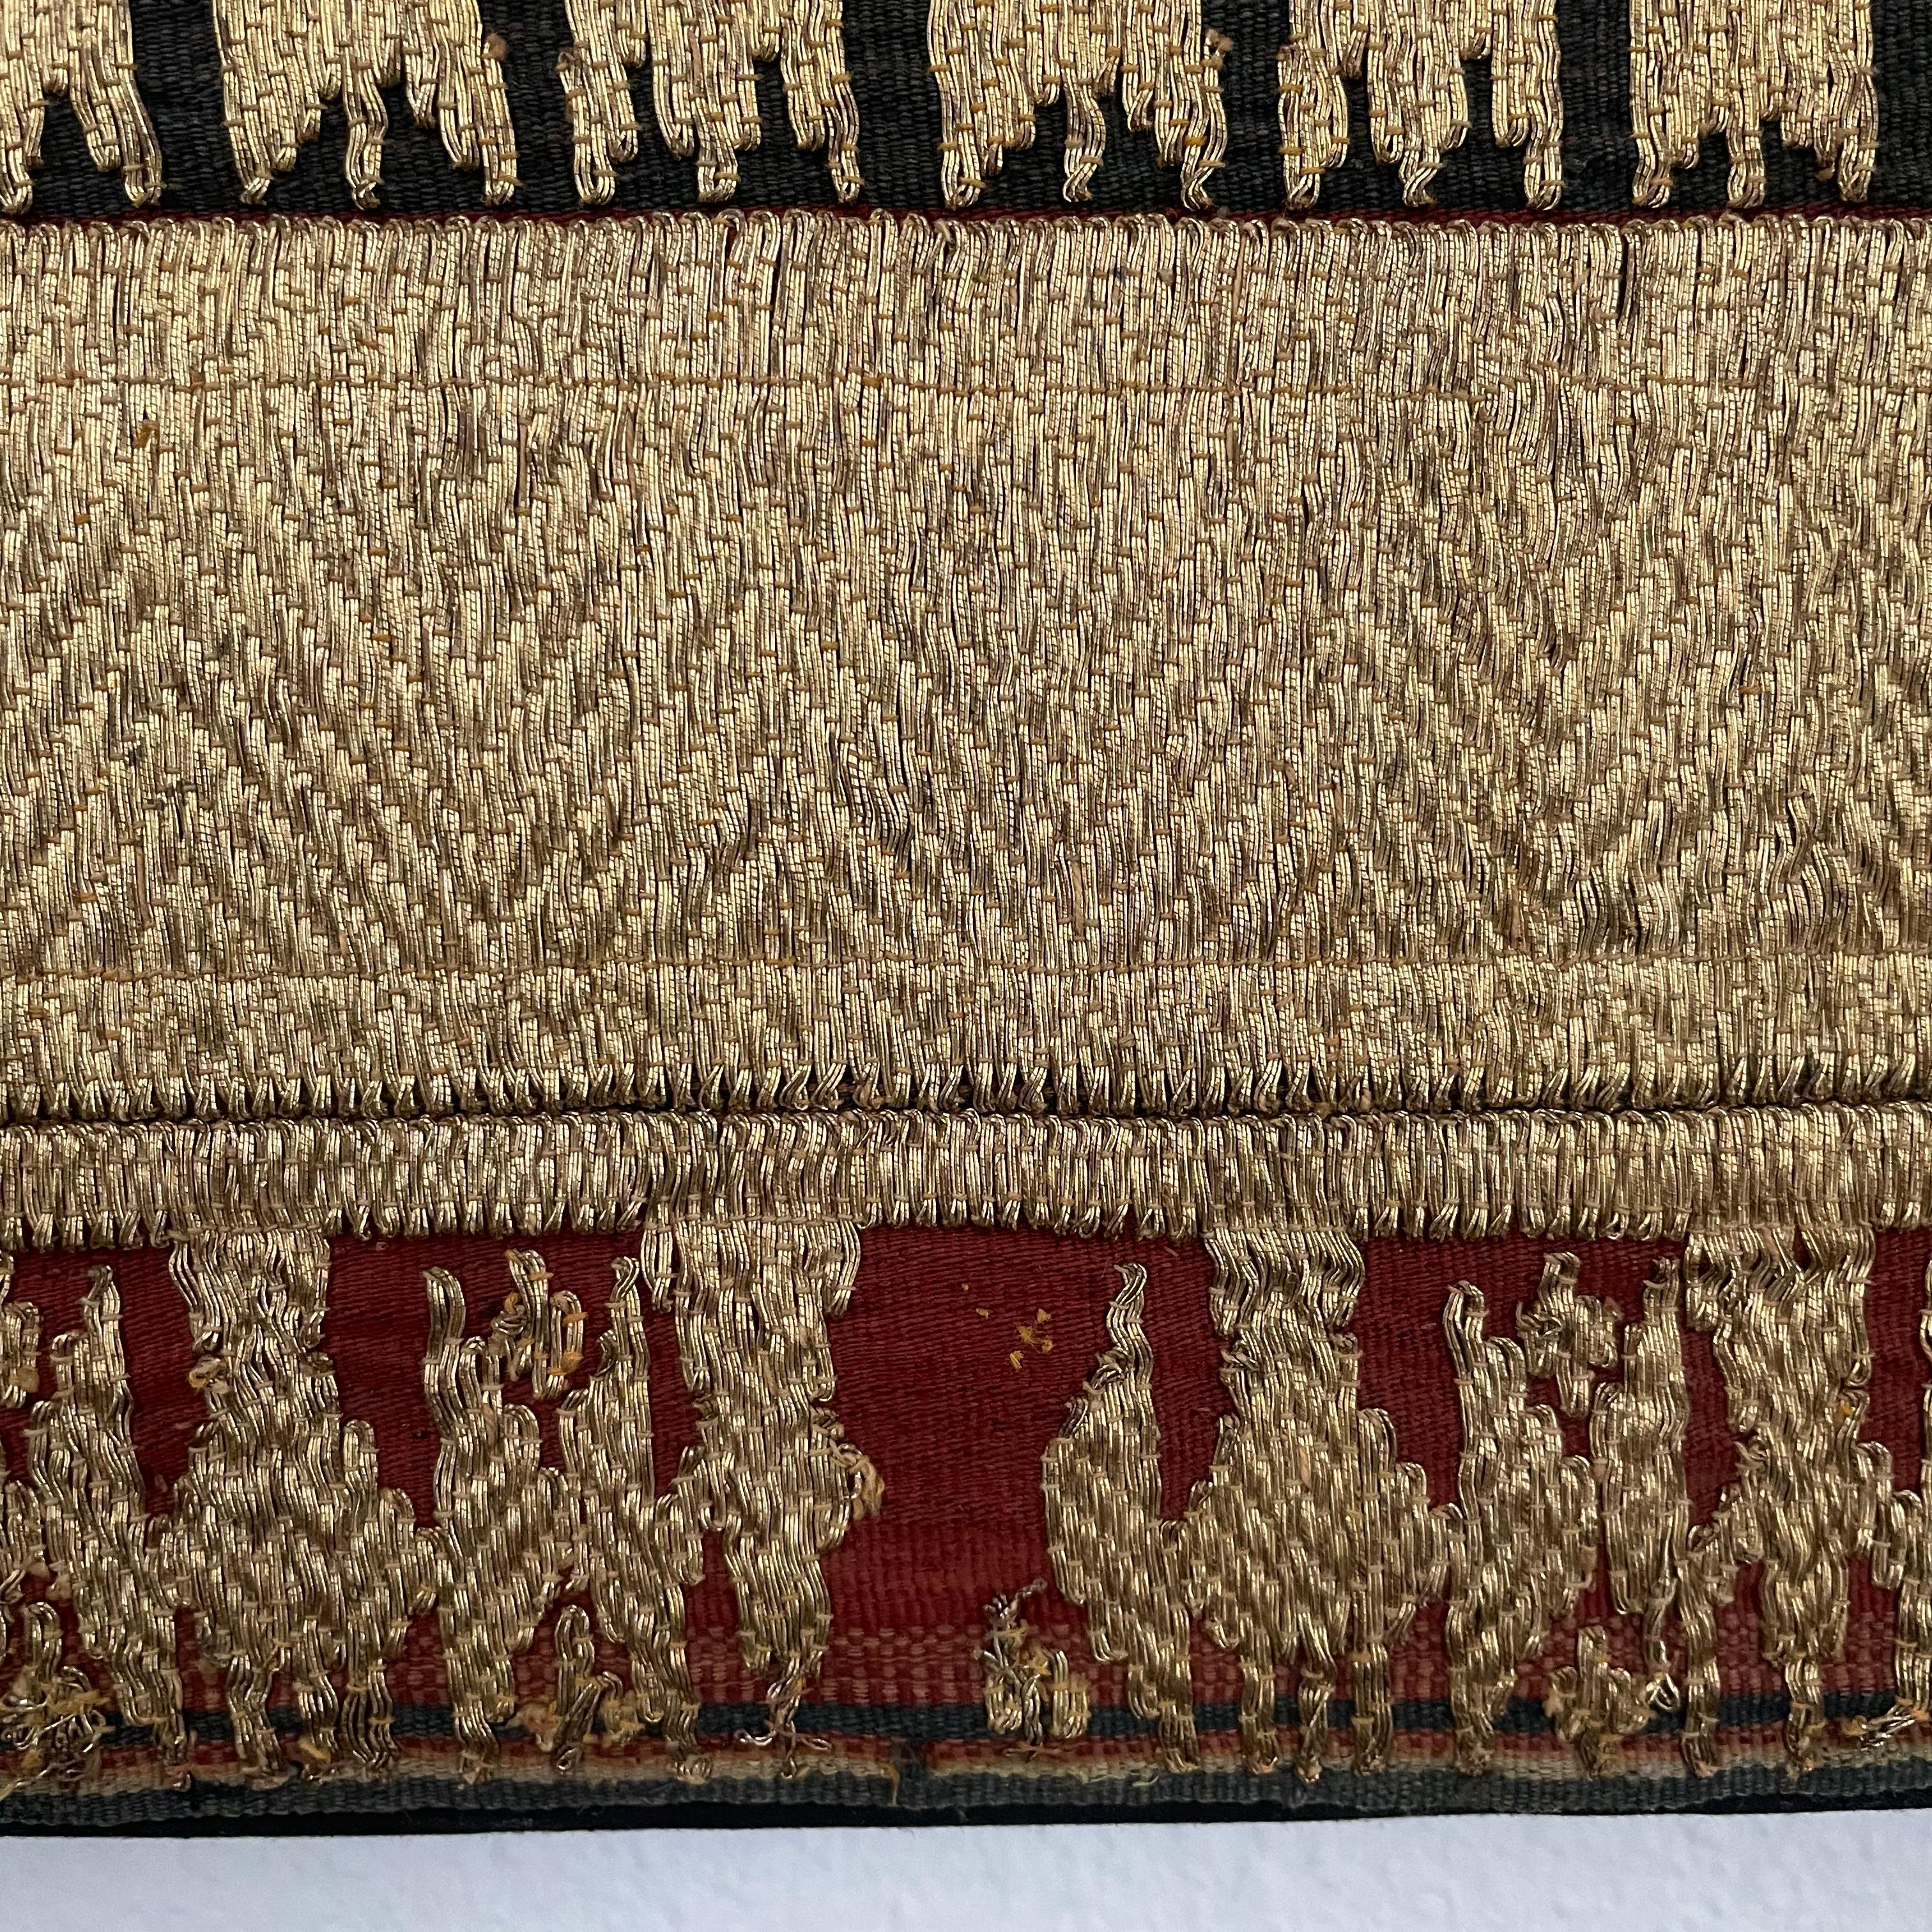 Antique Indonesian ceremonial skirt from the Abung people of Lampung, Sumatra 3